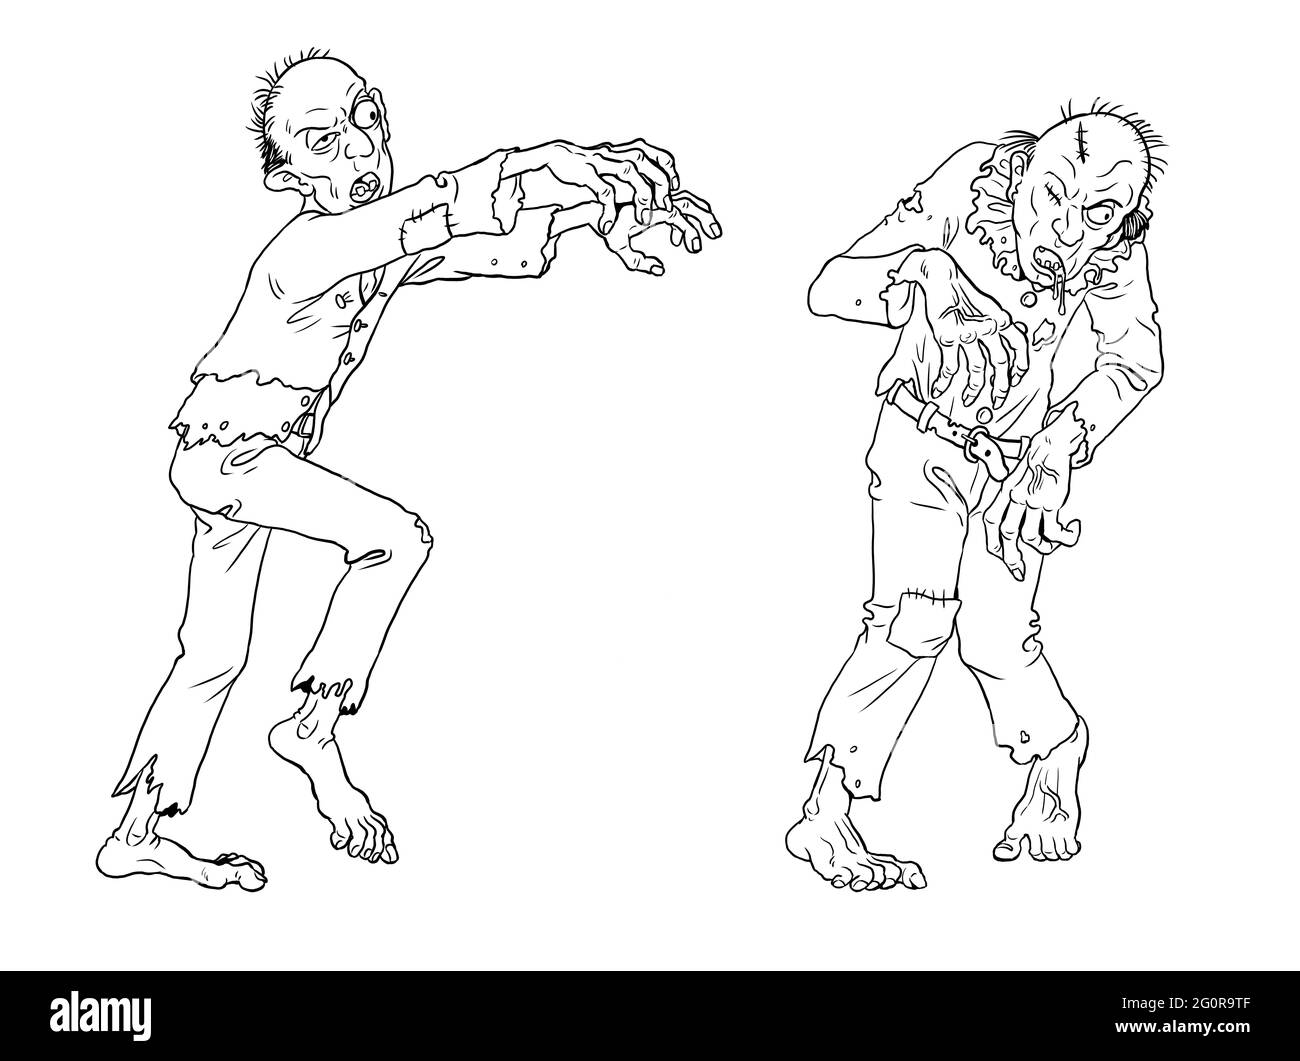 How To Draw A Zombie - My How To Draw